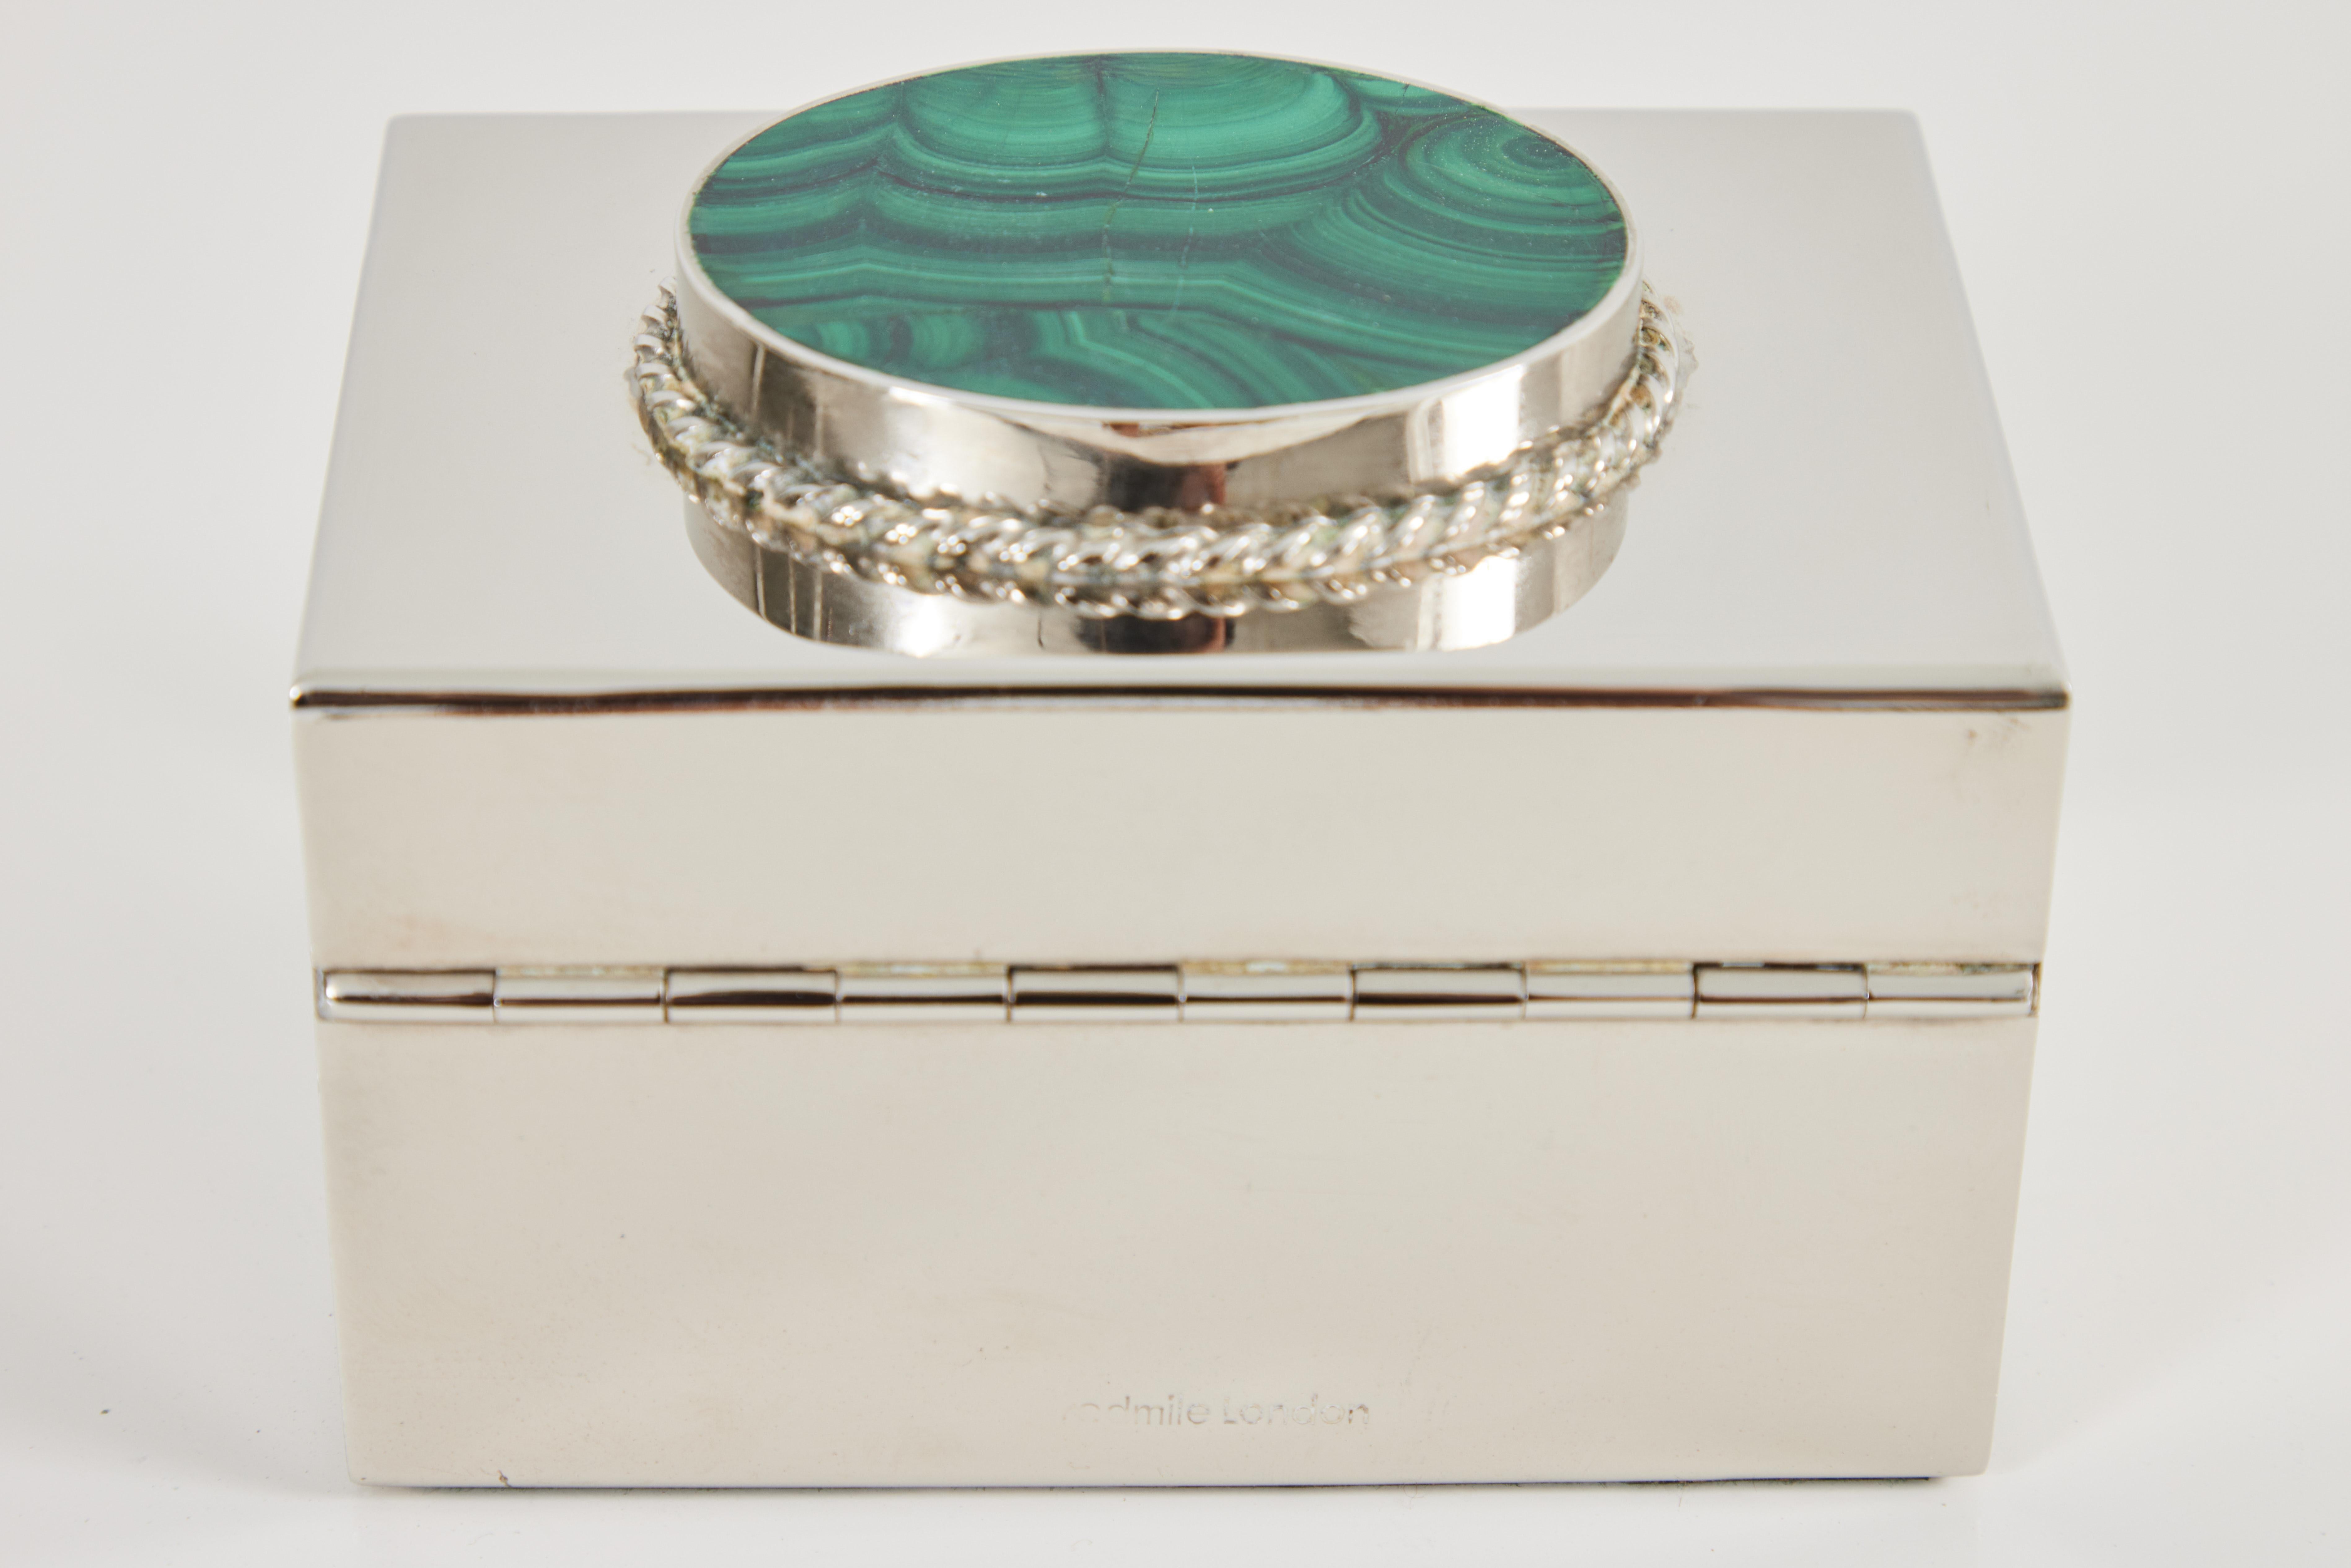 Polished Silver Plate and Malachite Lidded Box by Antony Redmille